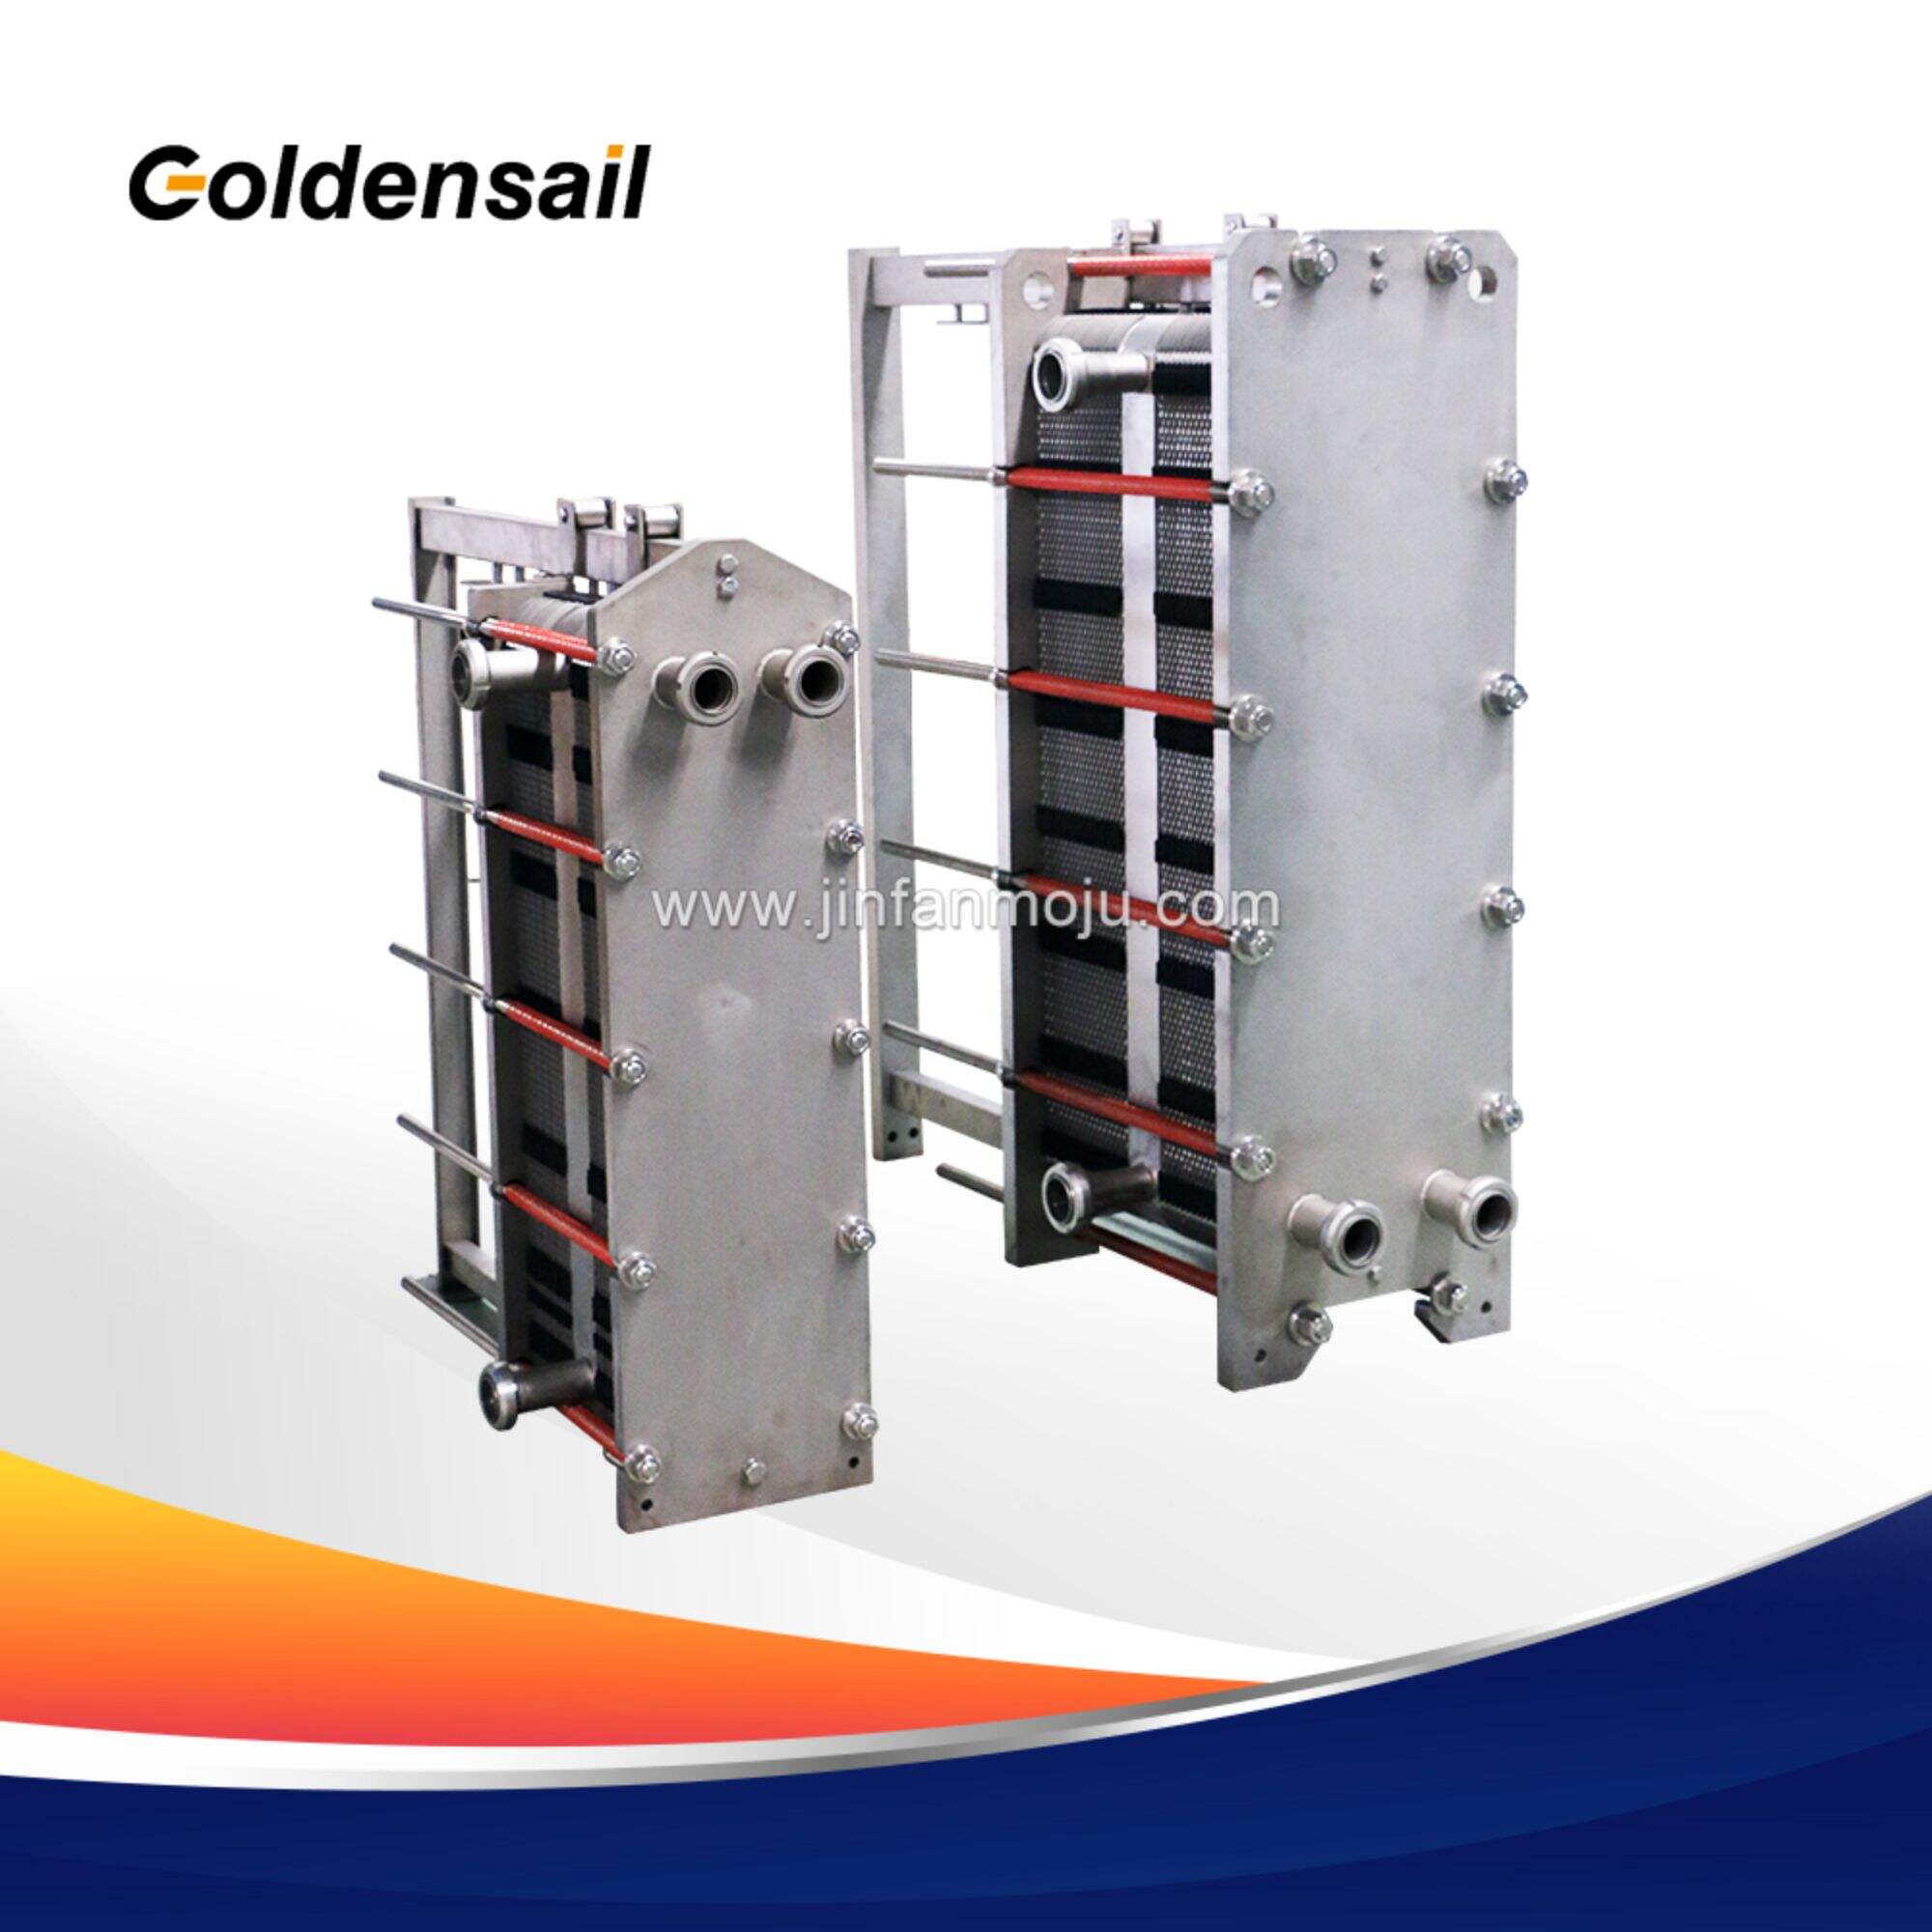 Sanitary stainless steel plate heat exchanger coolers for pasteurization